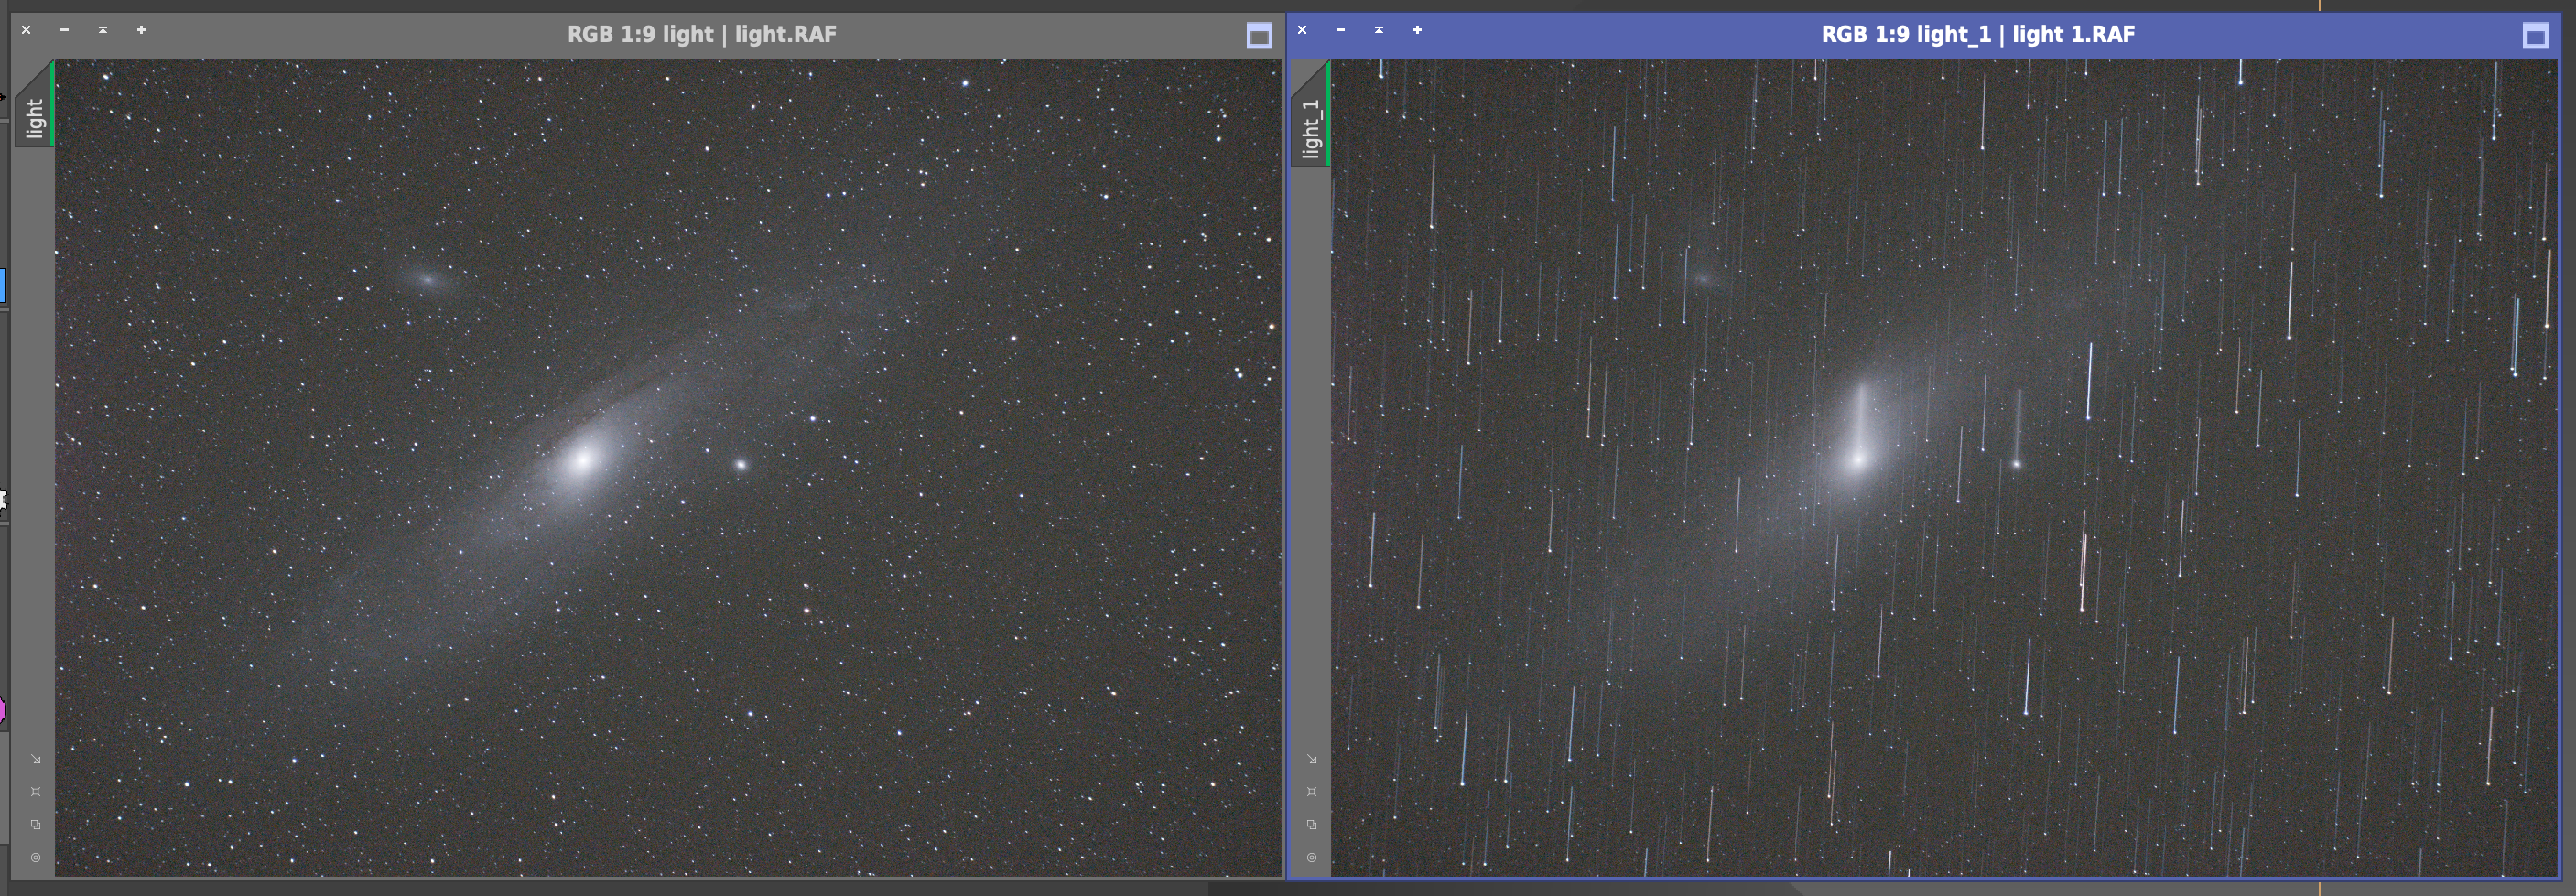 Star tracking in PixInsight